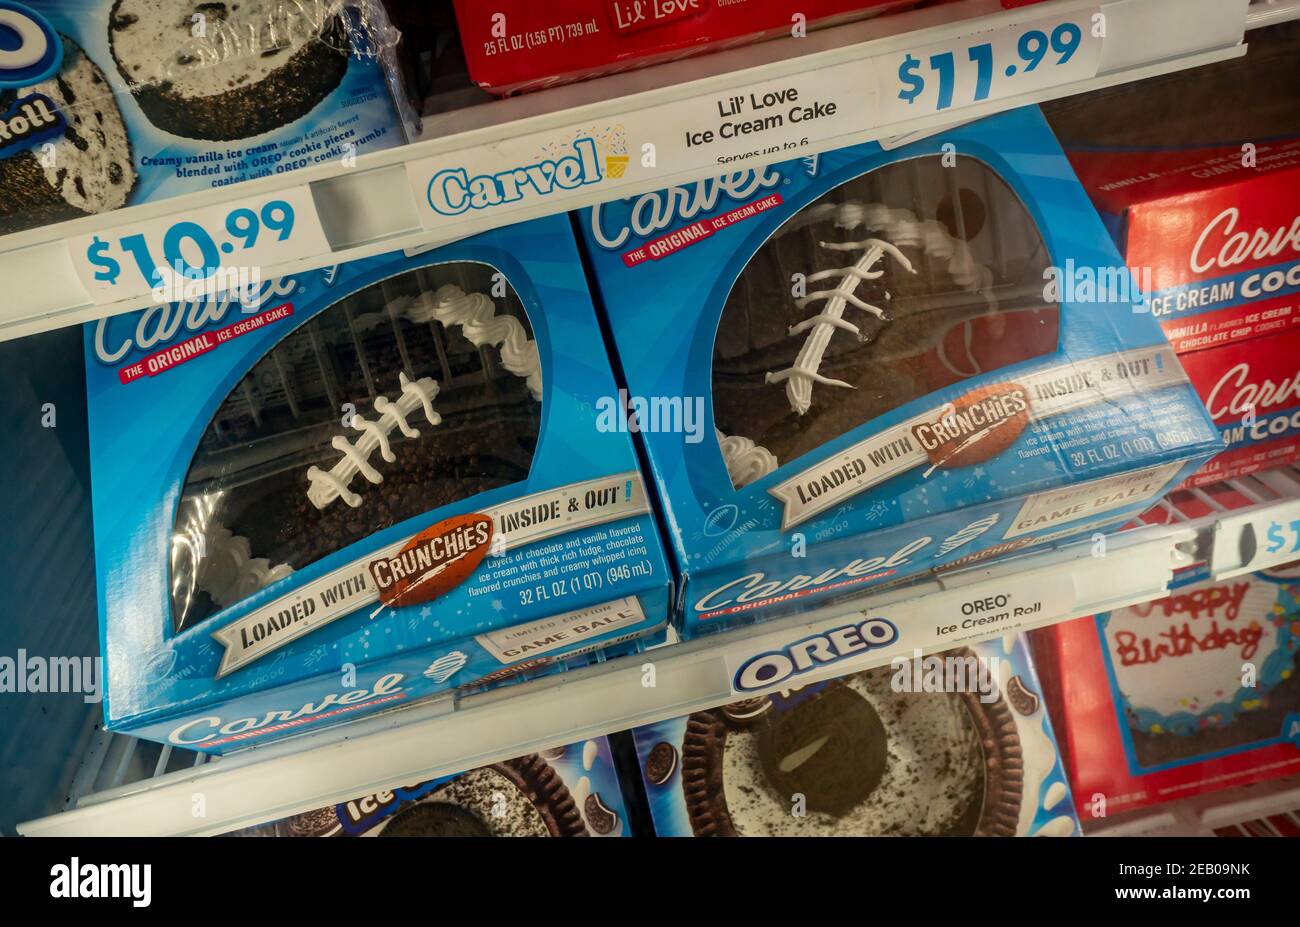 Football themed Carvel brand ice cream cakes in a supermarket freezer in New York prior to the Super Bowl, seen on Tuesday, January 19, 2021. Carvel. Cinnabon and Auntie Annes' chains are owned by Focus Brands. The 82 year old Carvel brand has over 400 locations on the East Coast and in Florida. (© Richard B. Levine) Stock Photo